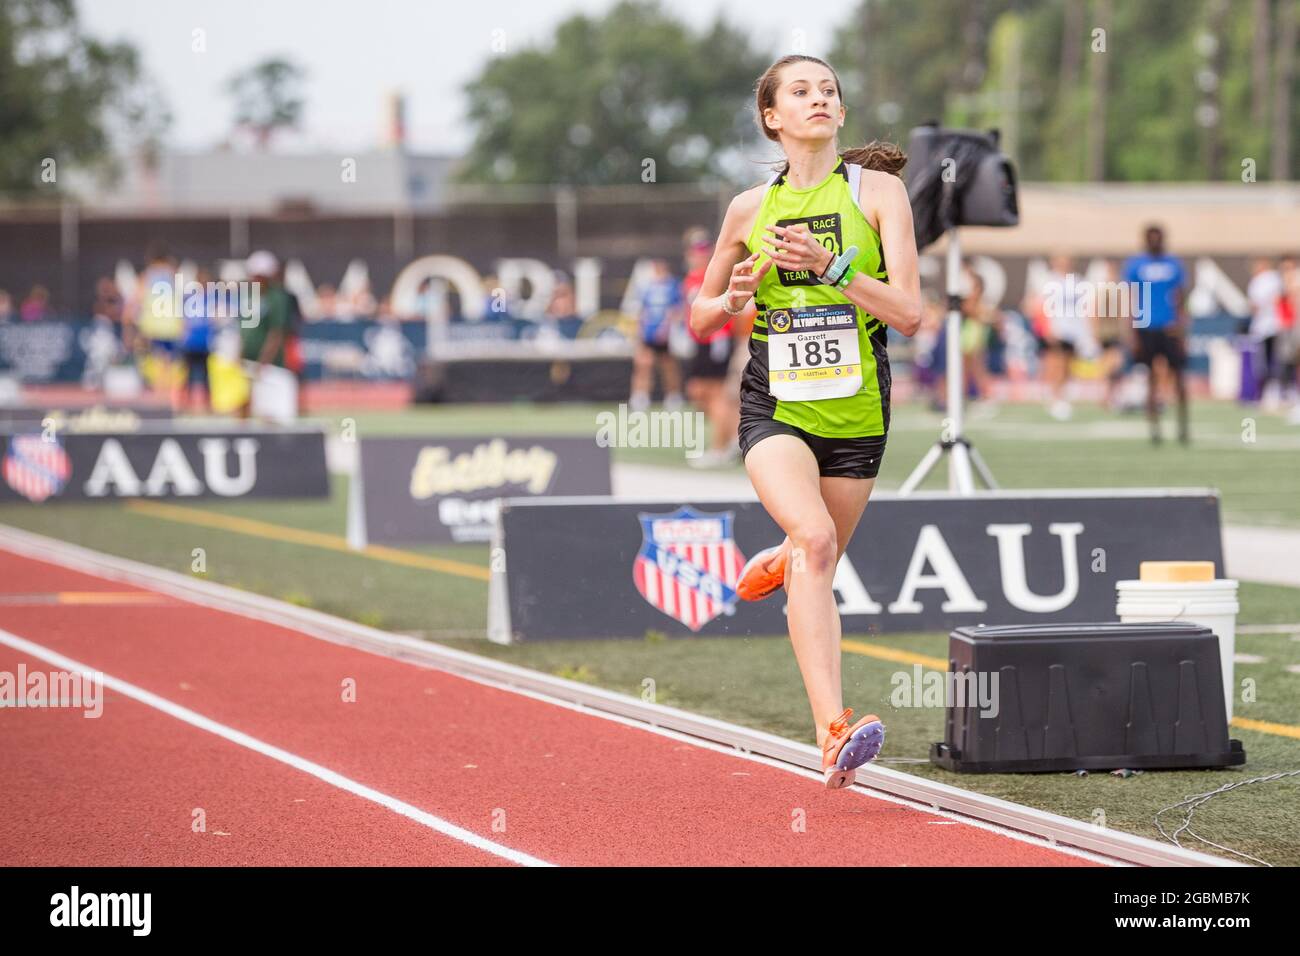 August 4, 2021: Caitlin Garrett wins the Girls 2000 Meter Steeplechase 15-16 years old division in the 2021 AAU Junior Olympic Games at George Turner Stadium in Houston, Texas. Prentice C. James/CSM Stock Photo